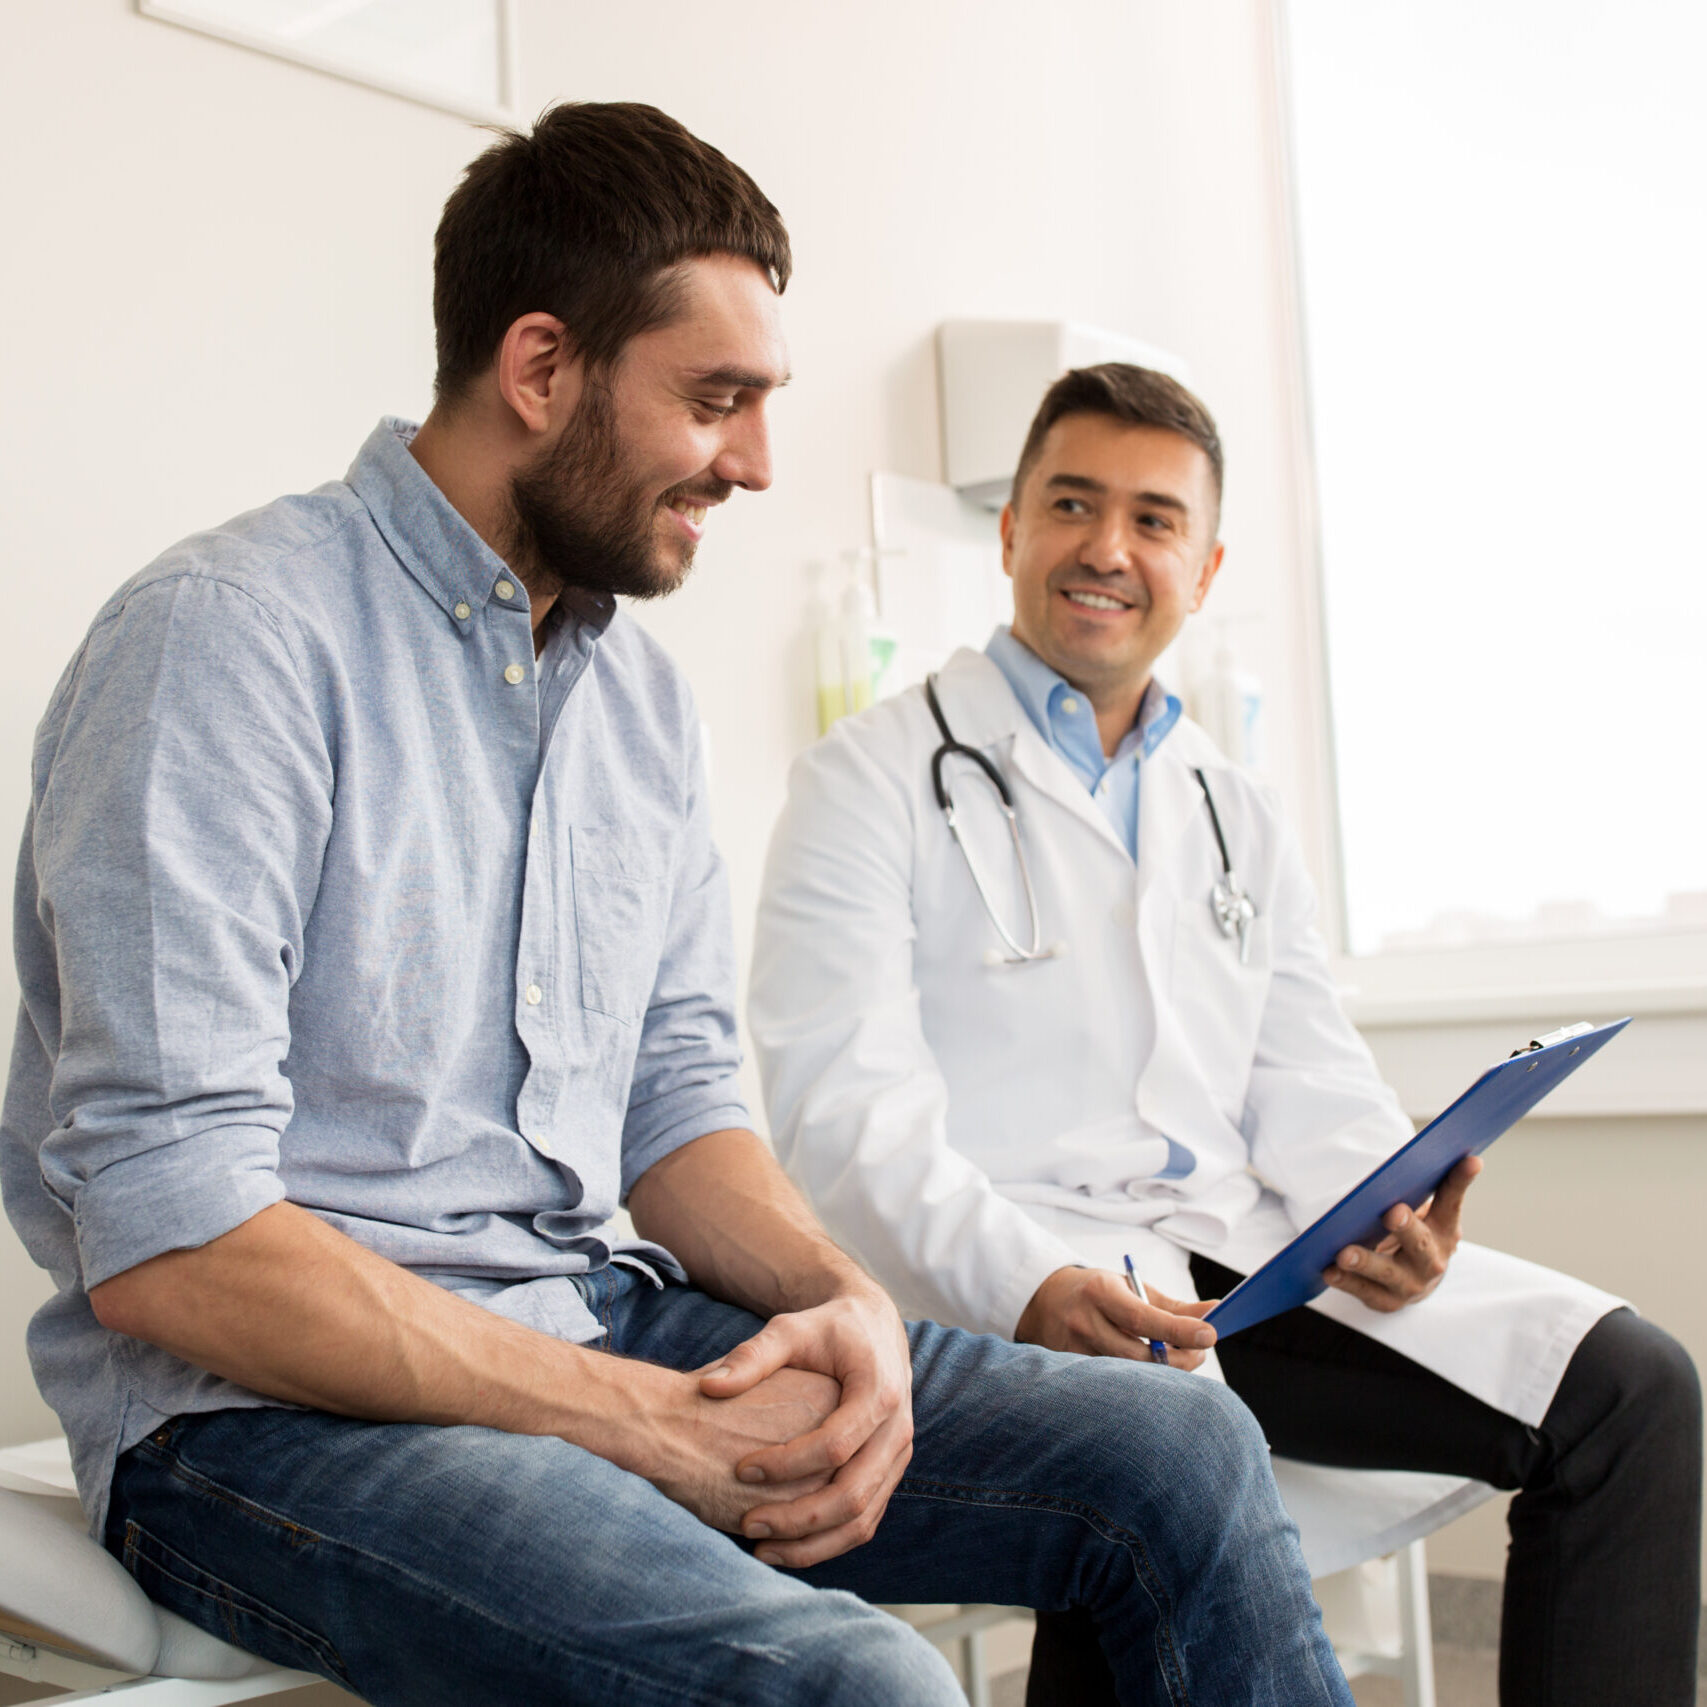 medicine, healthcare and people concept - smiling doctor with clipboard and young man patient meeting at hospital